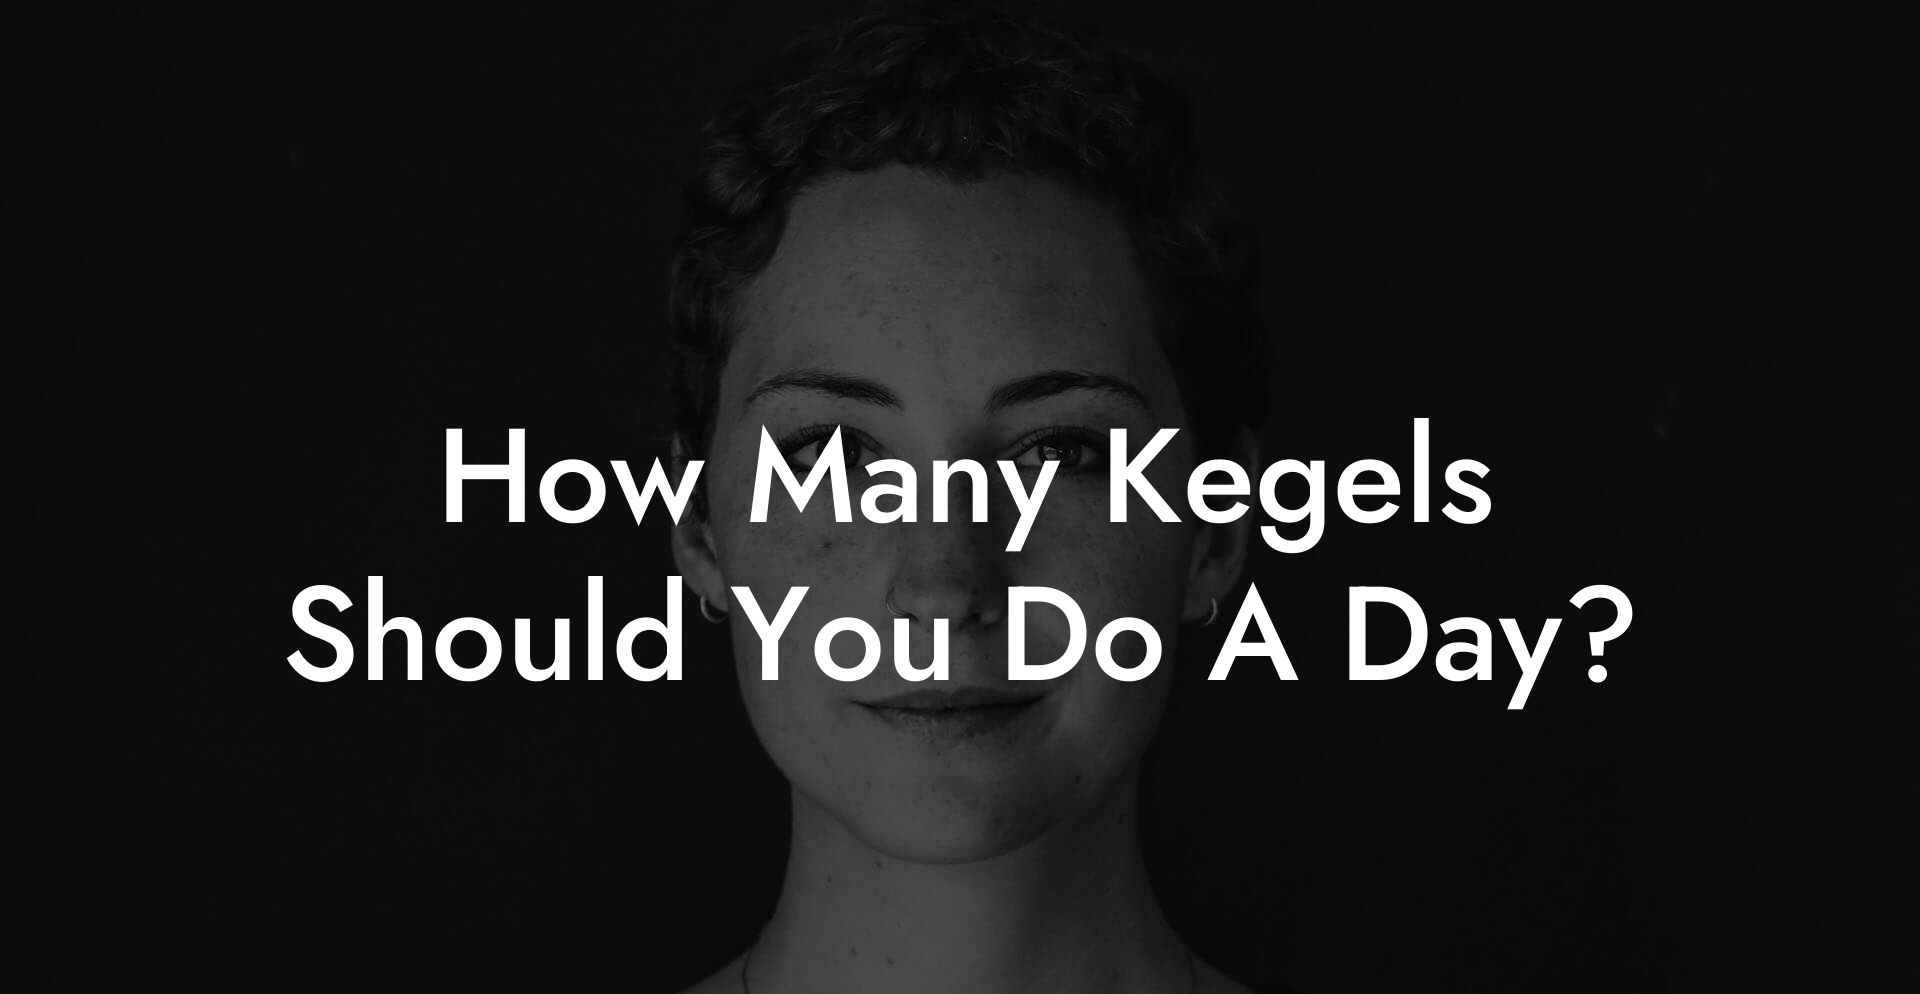 How Many Kegels Should You Do A Day?